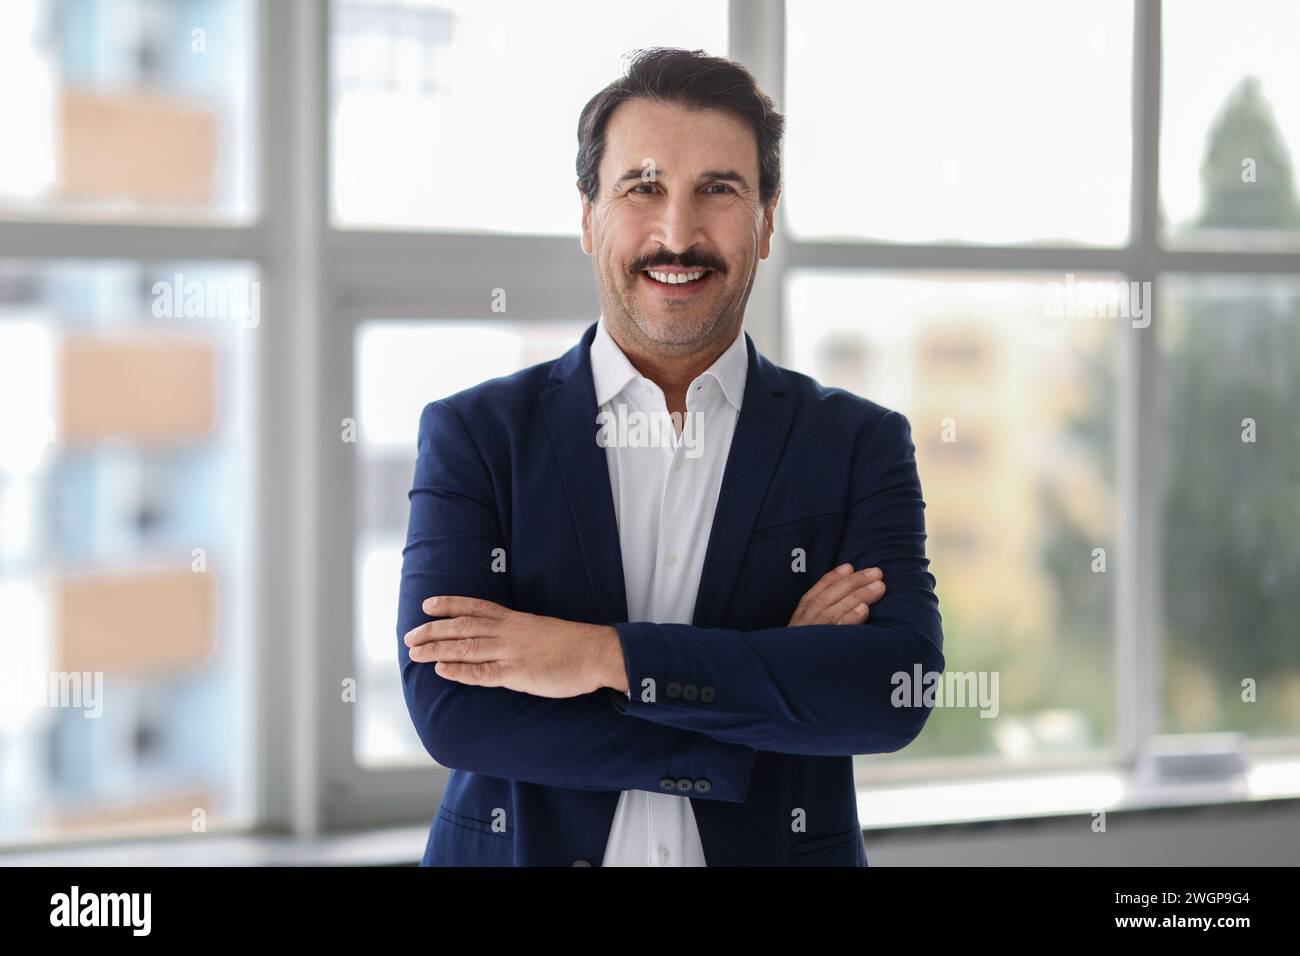 Confident middle-aged man with a mustache, wearing a blue suit and white shirt Stock Photo